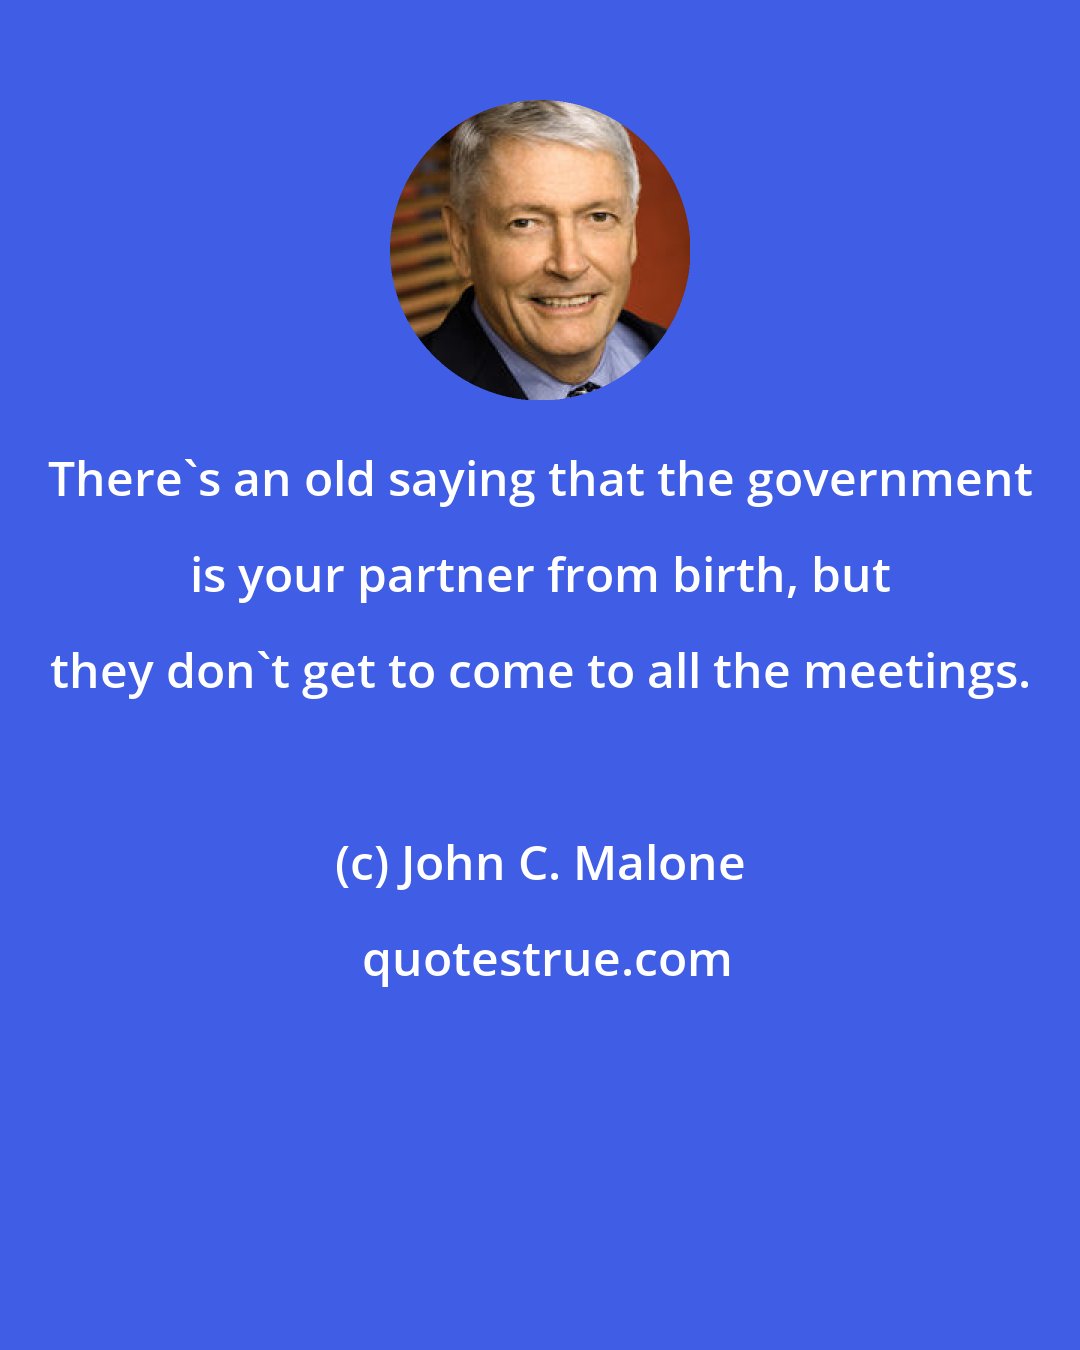 John C. Malone: There's an old saying that the government is your partner from birth, but they don't get to come to all the meetings.